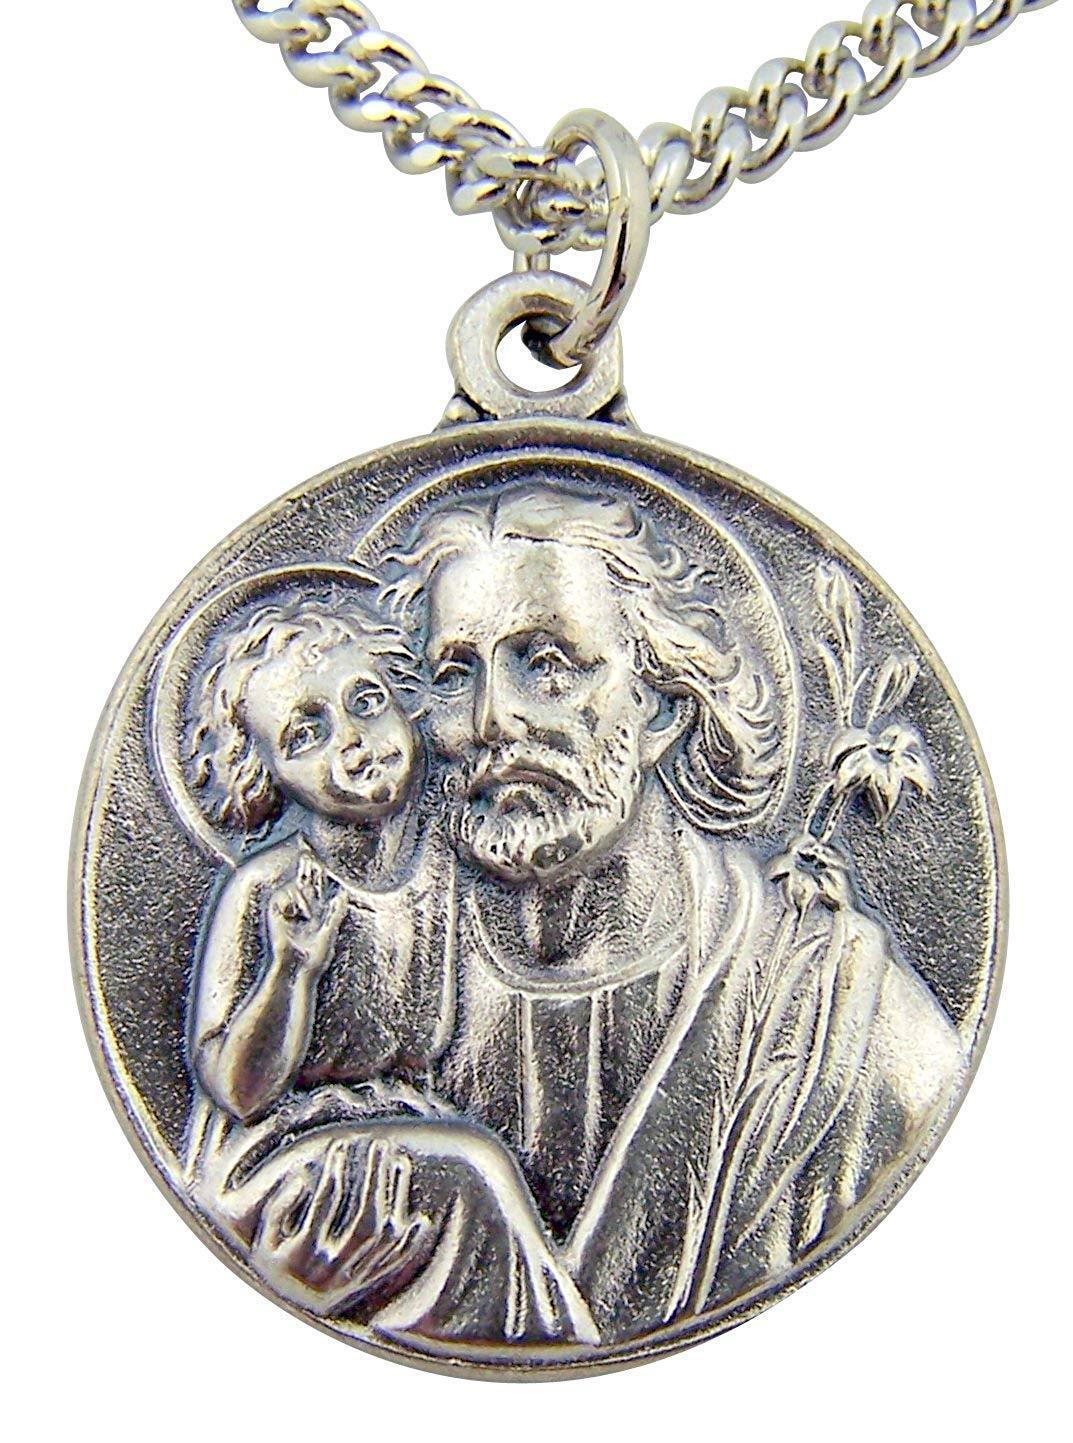 Silver Toned Base Patron Saint Joseph the Worker Father Medal, 7/8 Inch